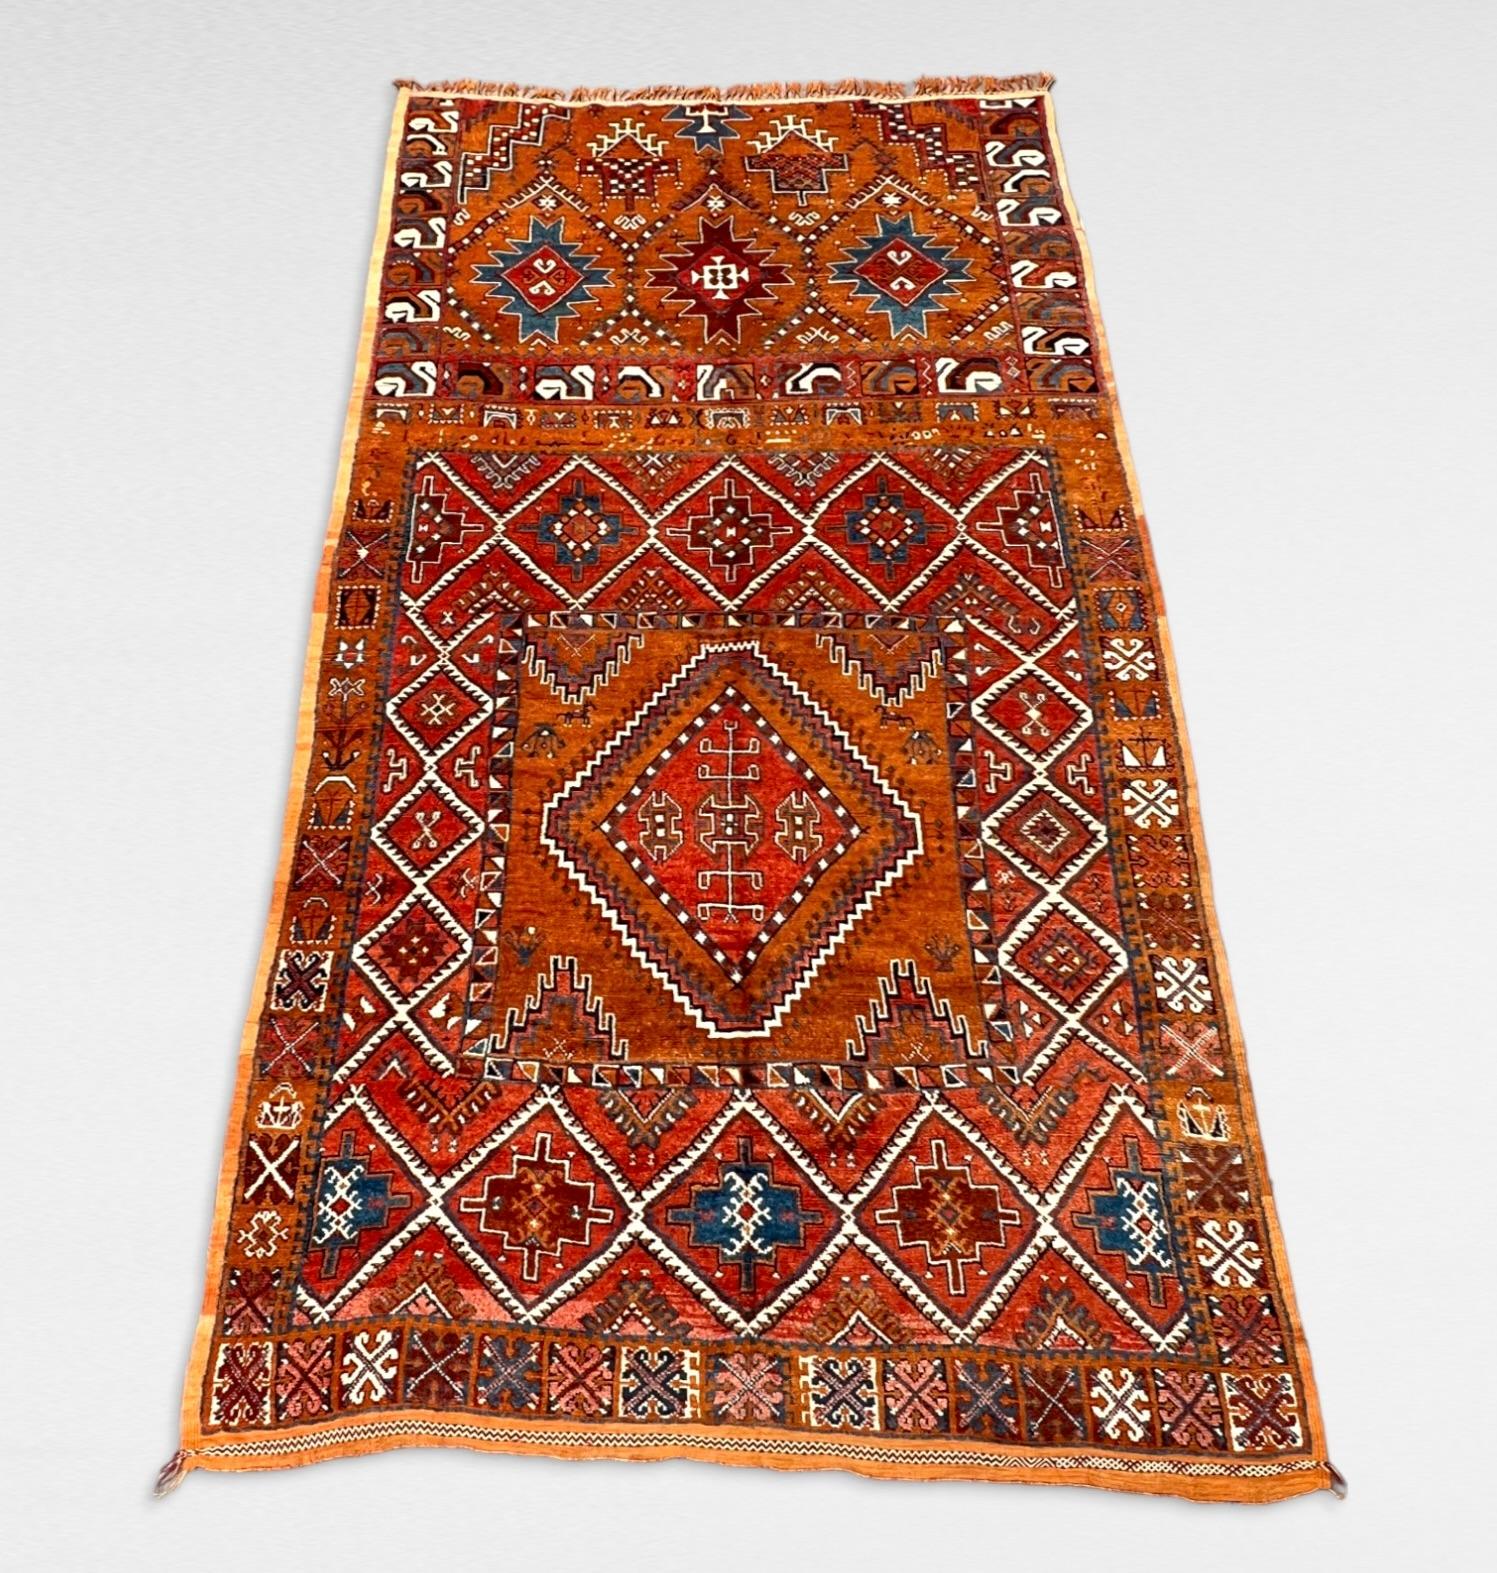 A collectors piece.

Rare 1940 Handcrafted Vintage Moroccan Taznakht Wool Rug.
Crafted by tribes affiliated with the esteemed Ait Ouaouzguite tribal confederation, this exquisite woollen rug emanate from the mystical Jbel Siroua region of Morocco,